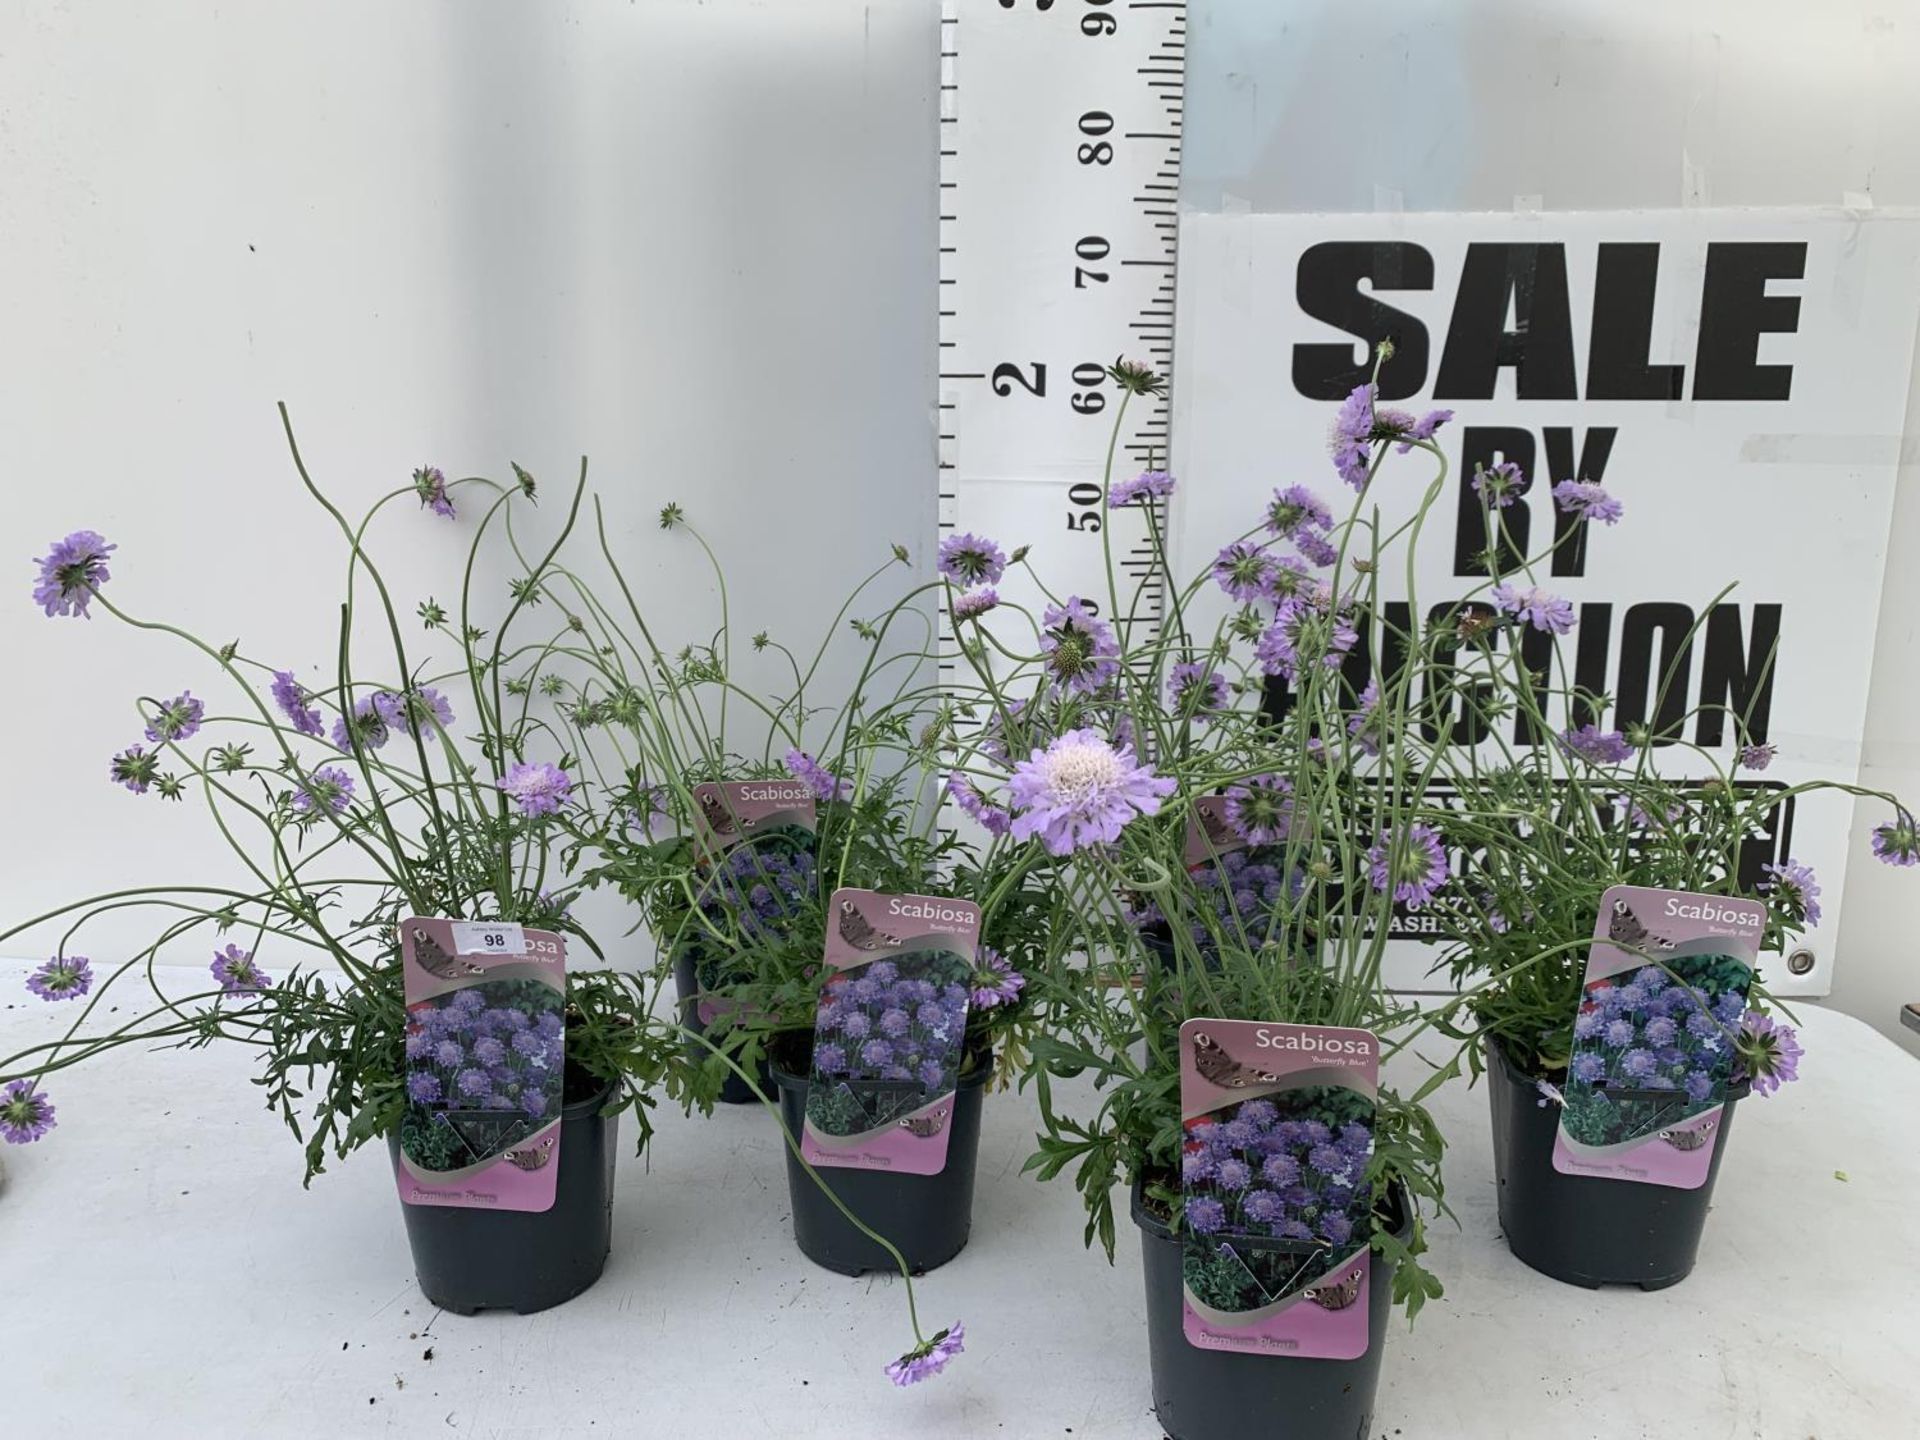 SIX SCABIOSA BUTTERFLY BLUE IN 2 LTR POTS 50-60CM TALL TO BE SOLD FOR THE SIX PLUS VAT - Image 2 of 8